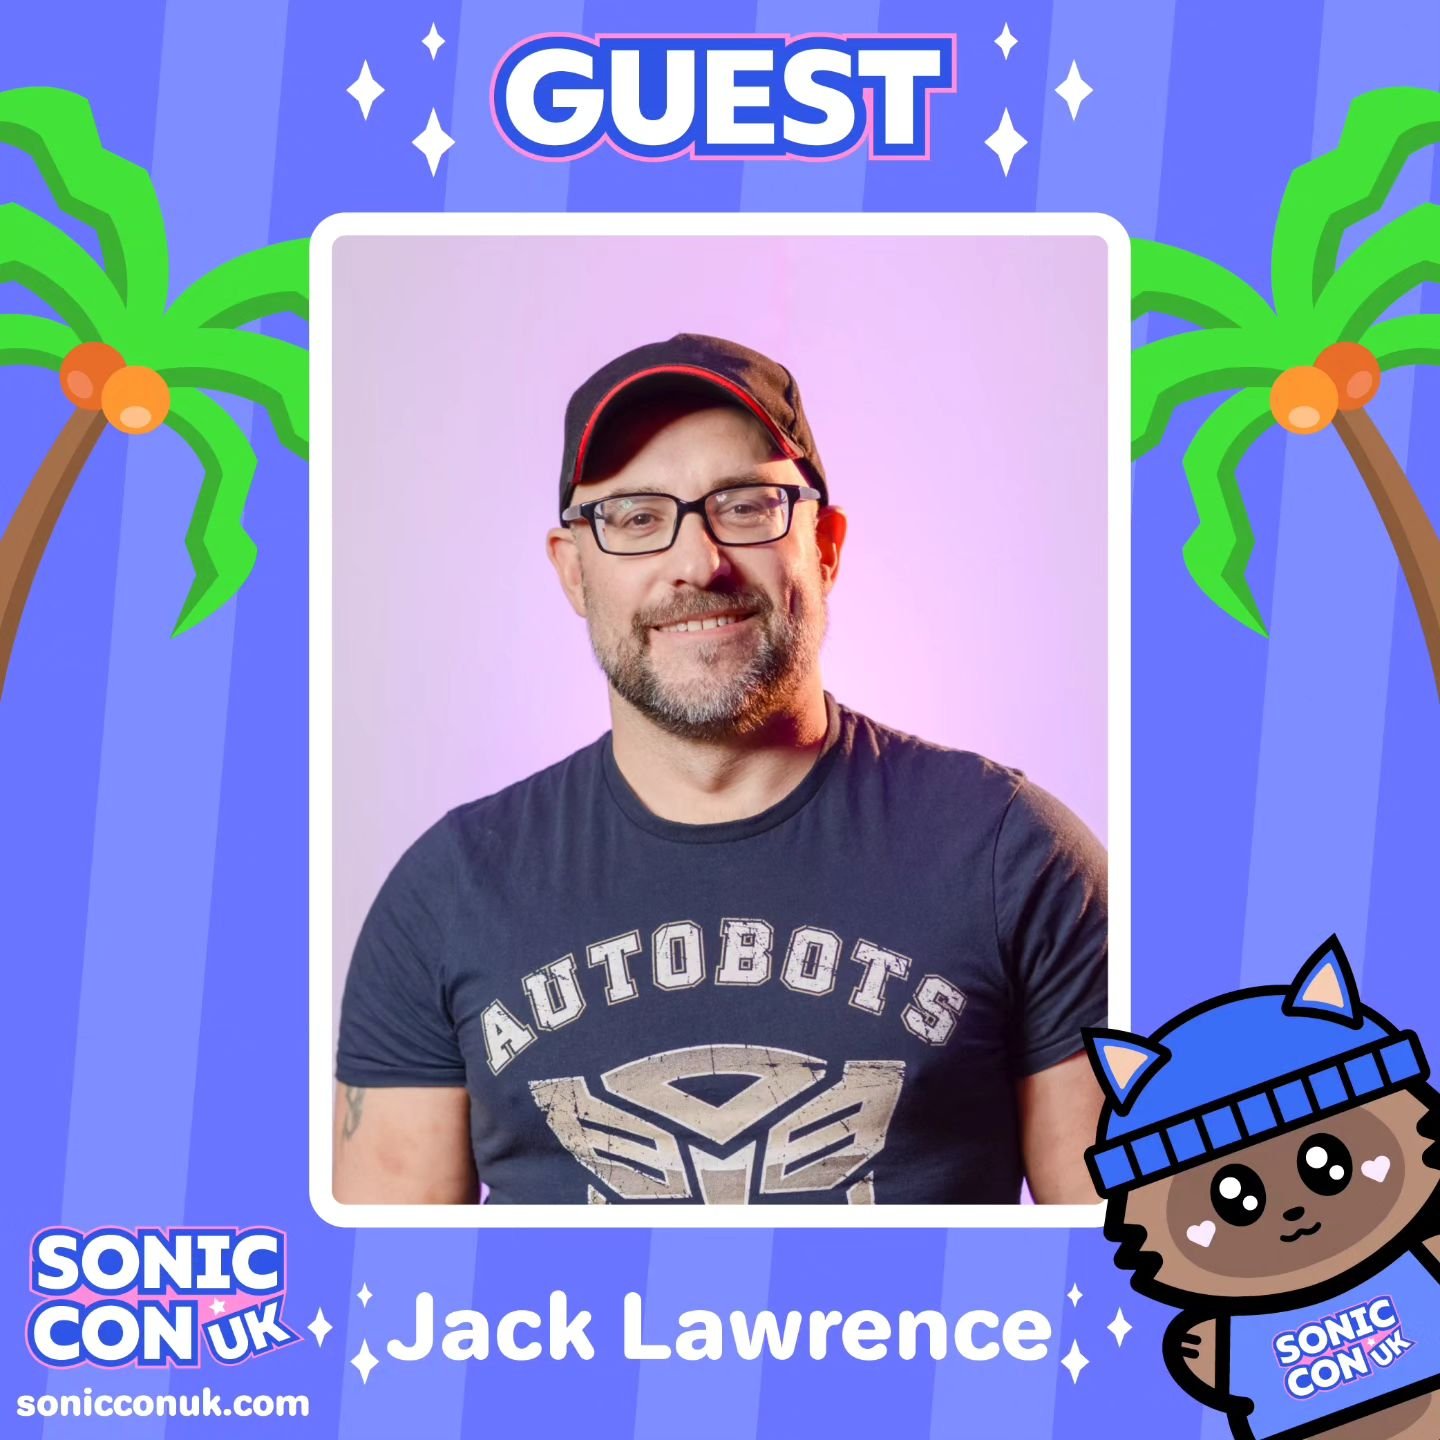 💙✨ Guest announcement! ✨💙 
We're excited to announce that @jlawrence_art will be joining us at Sonic Con UK! 💙 

Jack Lawrence began working as a professional comic artist in early 2003, working for a variety of publishers including Image, Titan, 